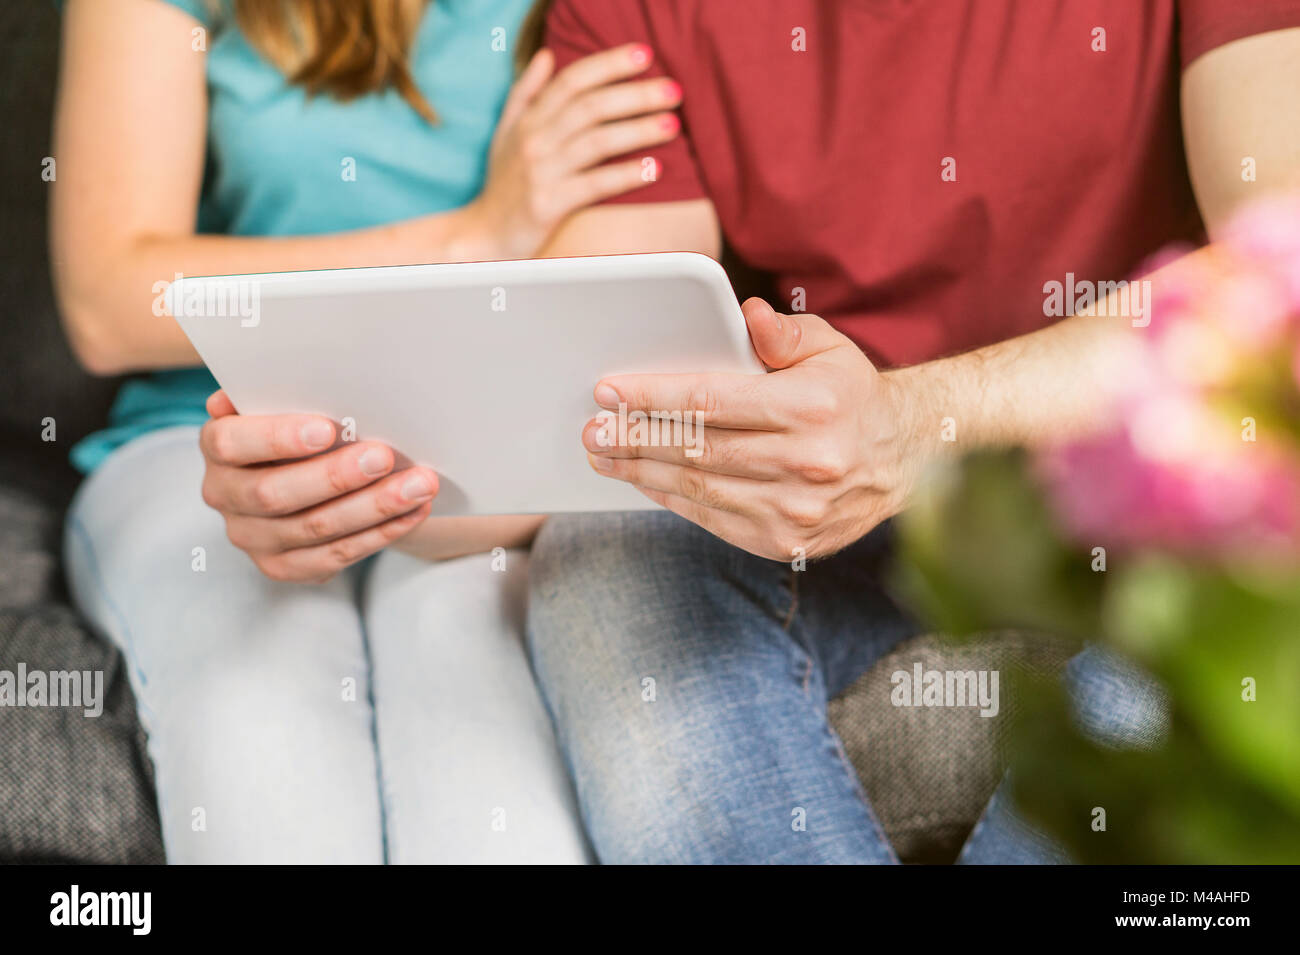 Happy couple using tablet together on couch. Young man and woman browsing internet or watching tv or movie stream online on smart mobile device. Stock Photo